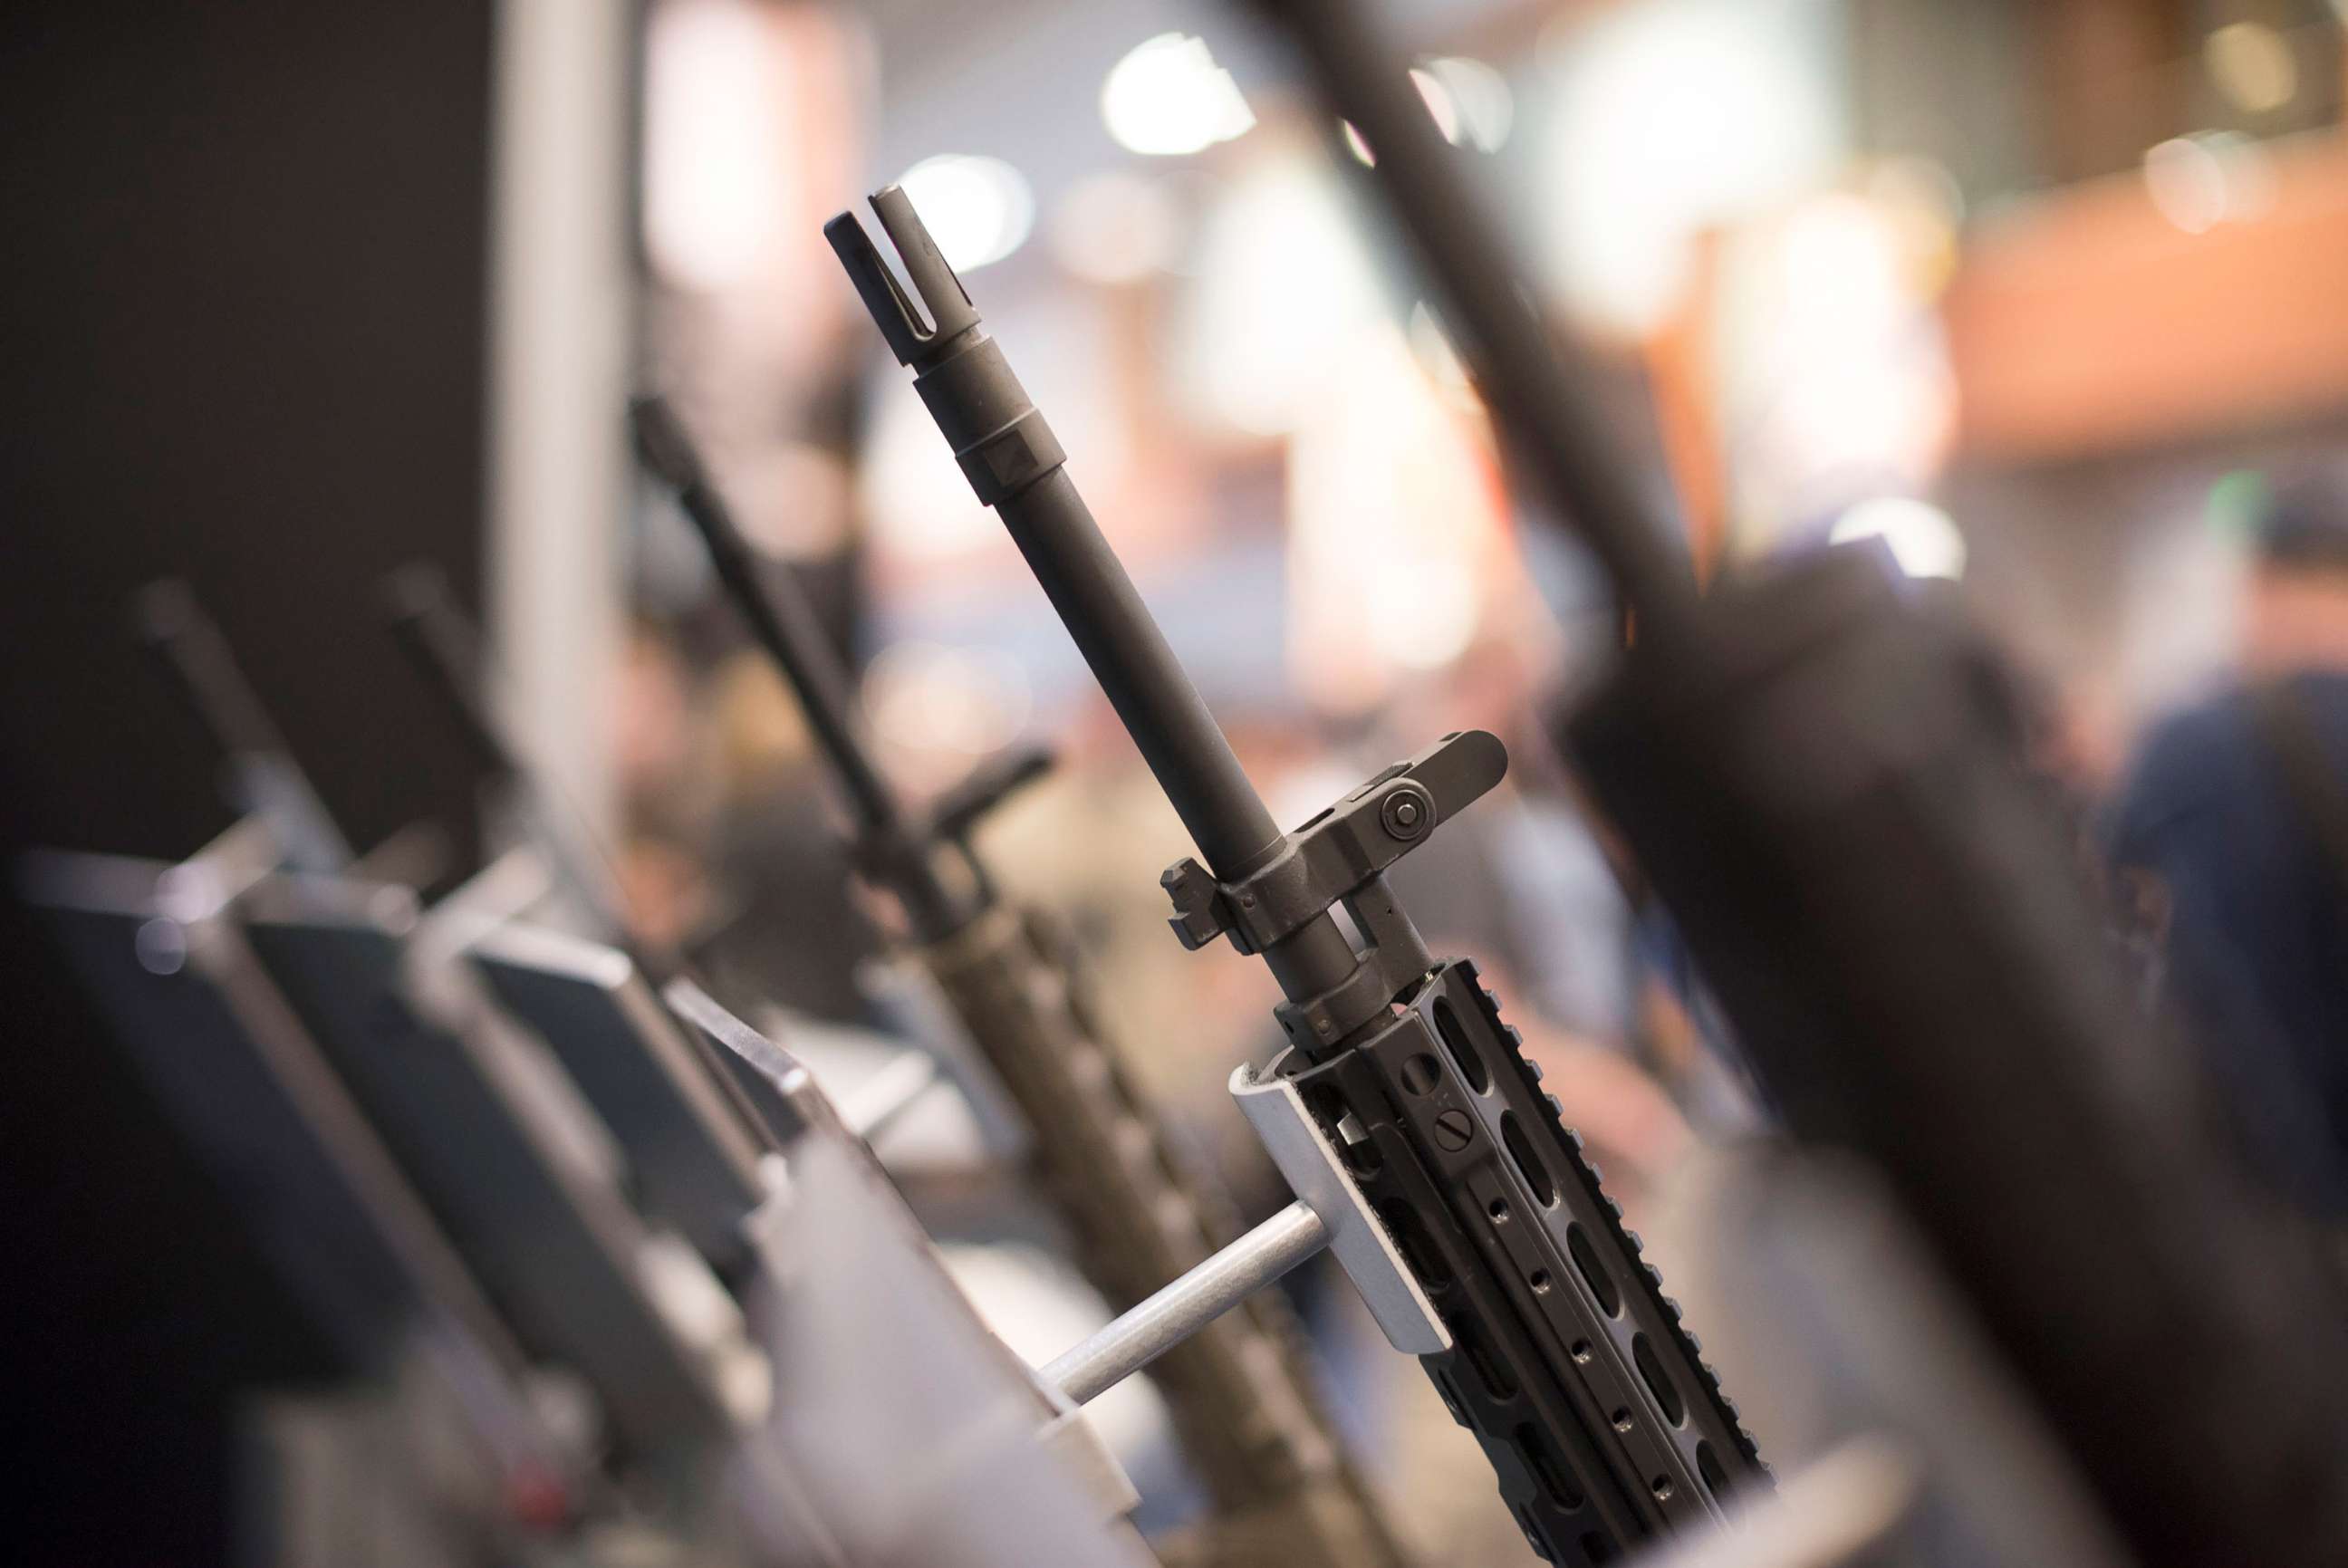 PHOTO: Weapons are on display on the exhibition floor of the 144th National Rifle Association (NRA) Annual Meetings and Exhibits in Nashville, Tenn, April 11, 2015.